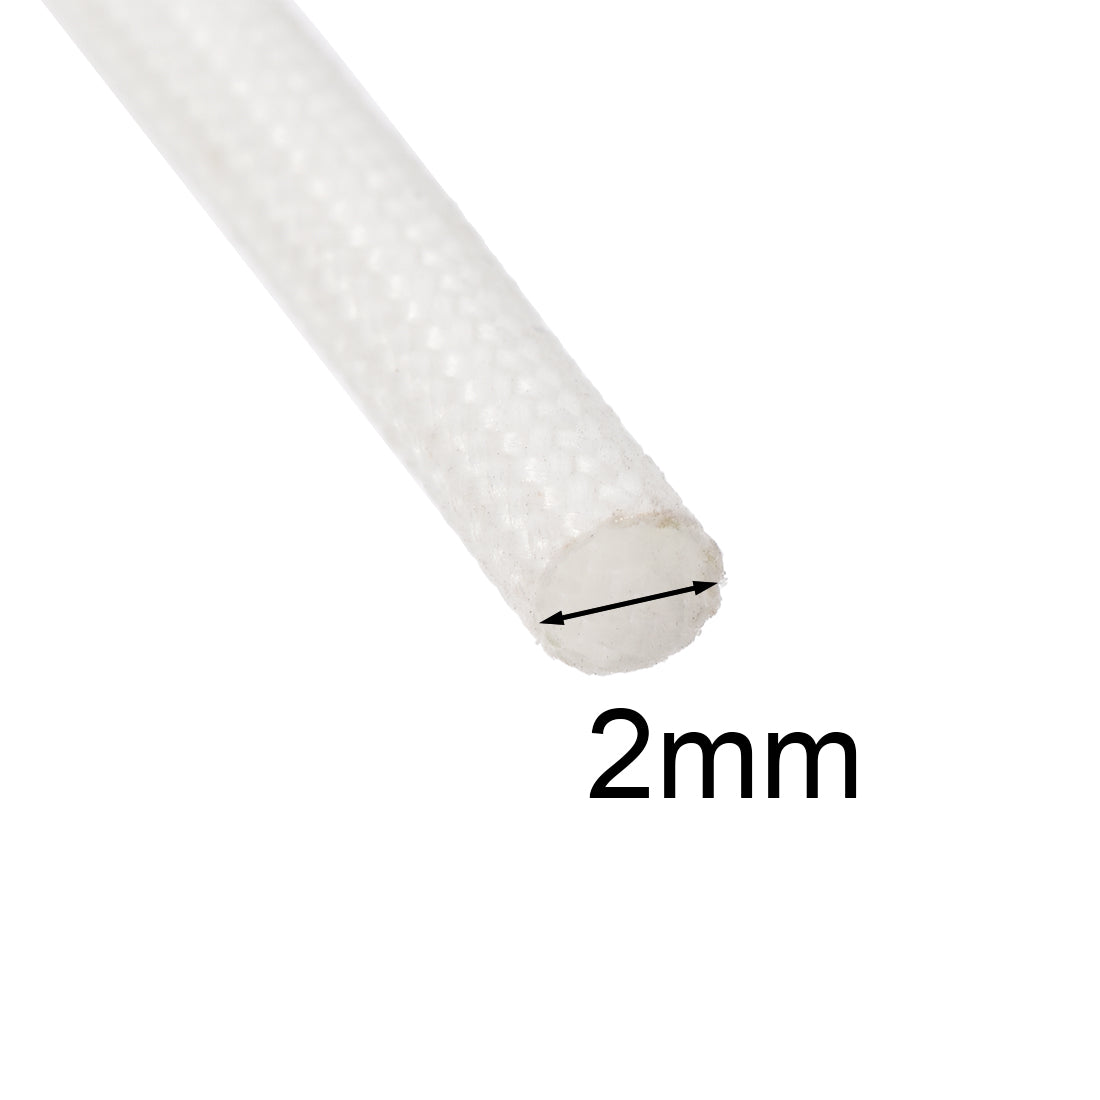 uxcell Uxcell Insulation Cable Protector,16.4Ft-2mm High TEMP Silicone Fiberglass Sleeve White